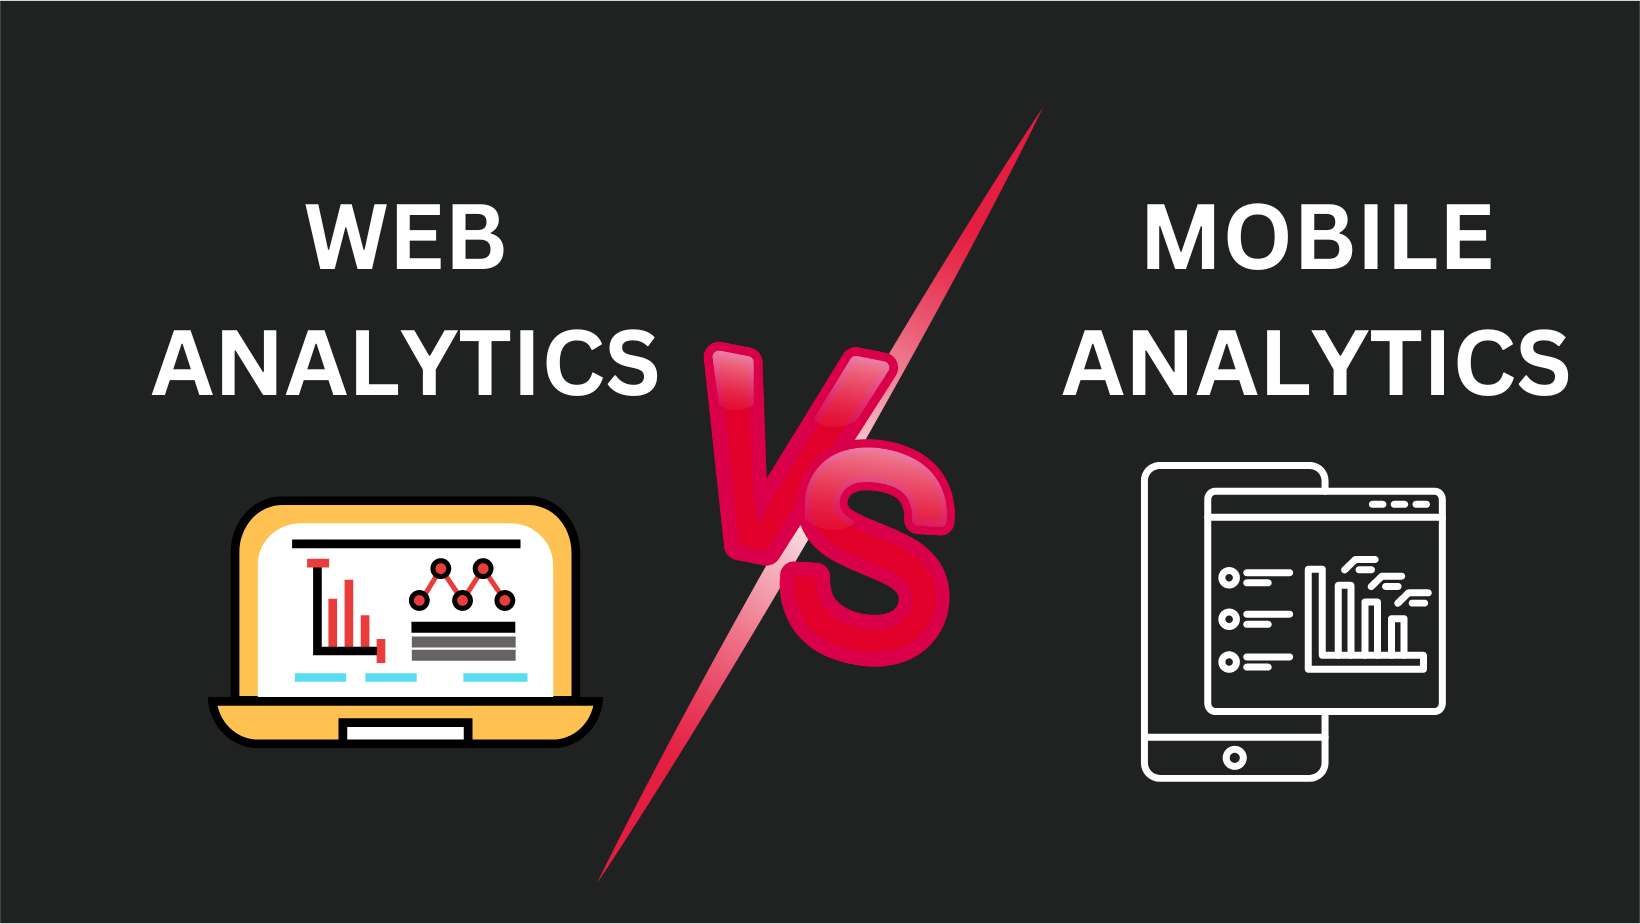 What is the difference between web and mobile analytics